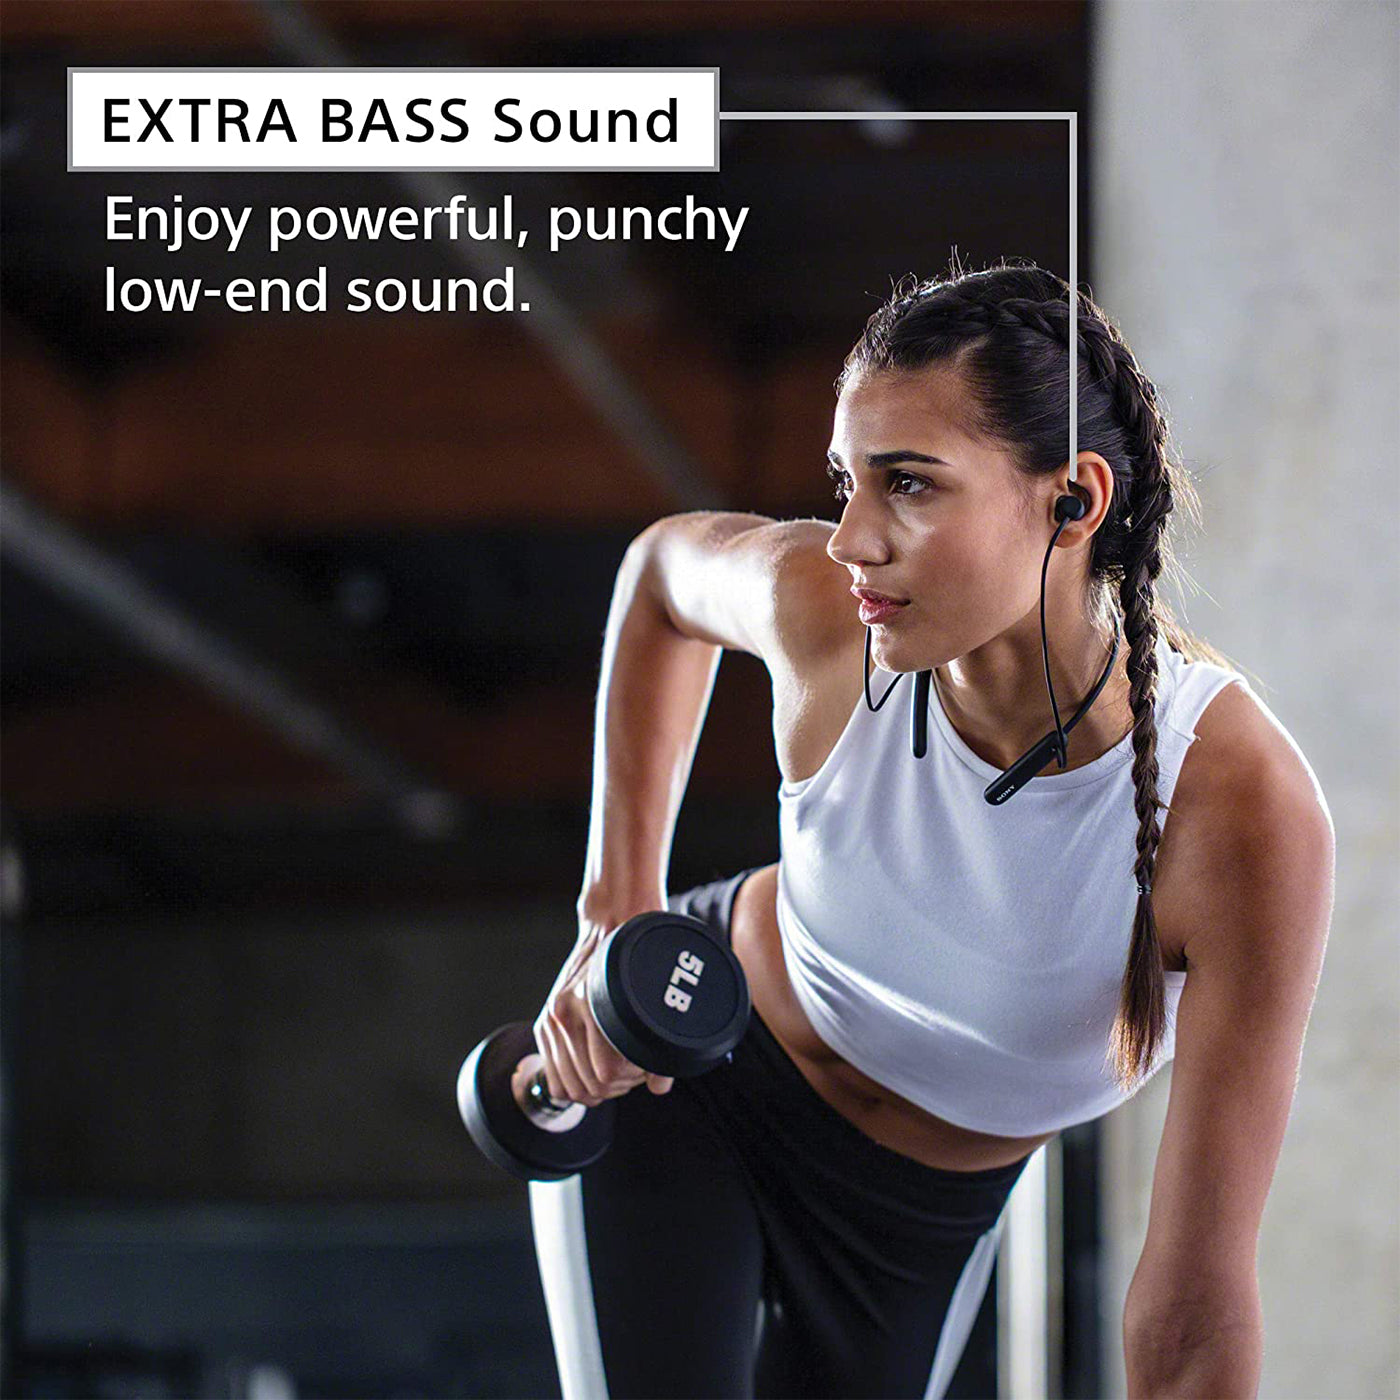 Sony WI-SP510 Wireless Sports Extra Bass Headphones with Splash proof, 15 Hrs battery life